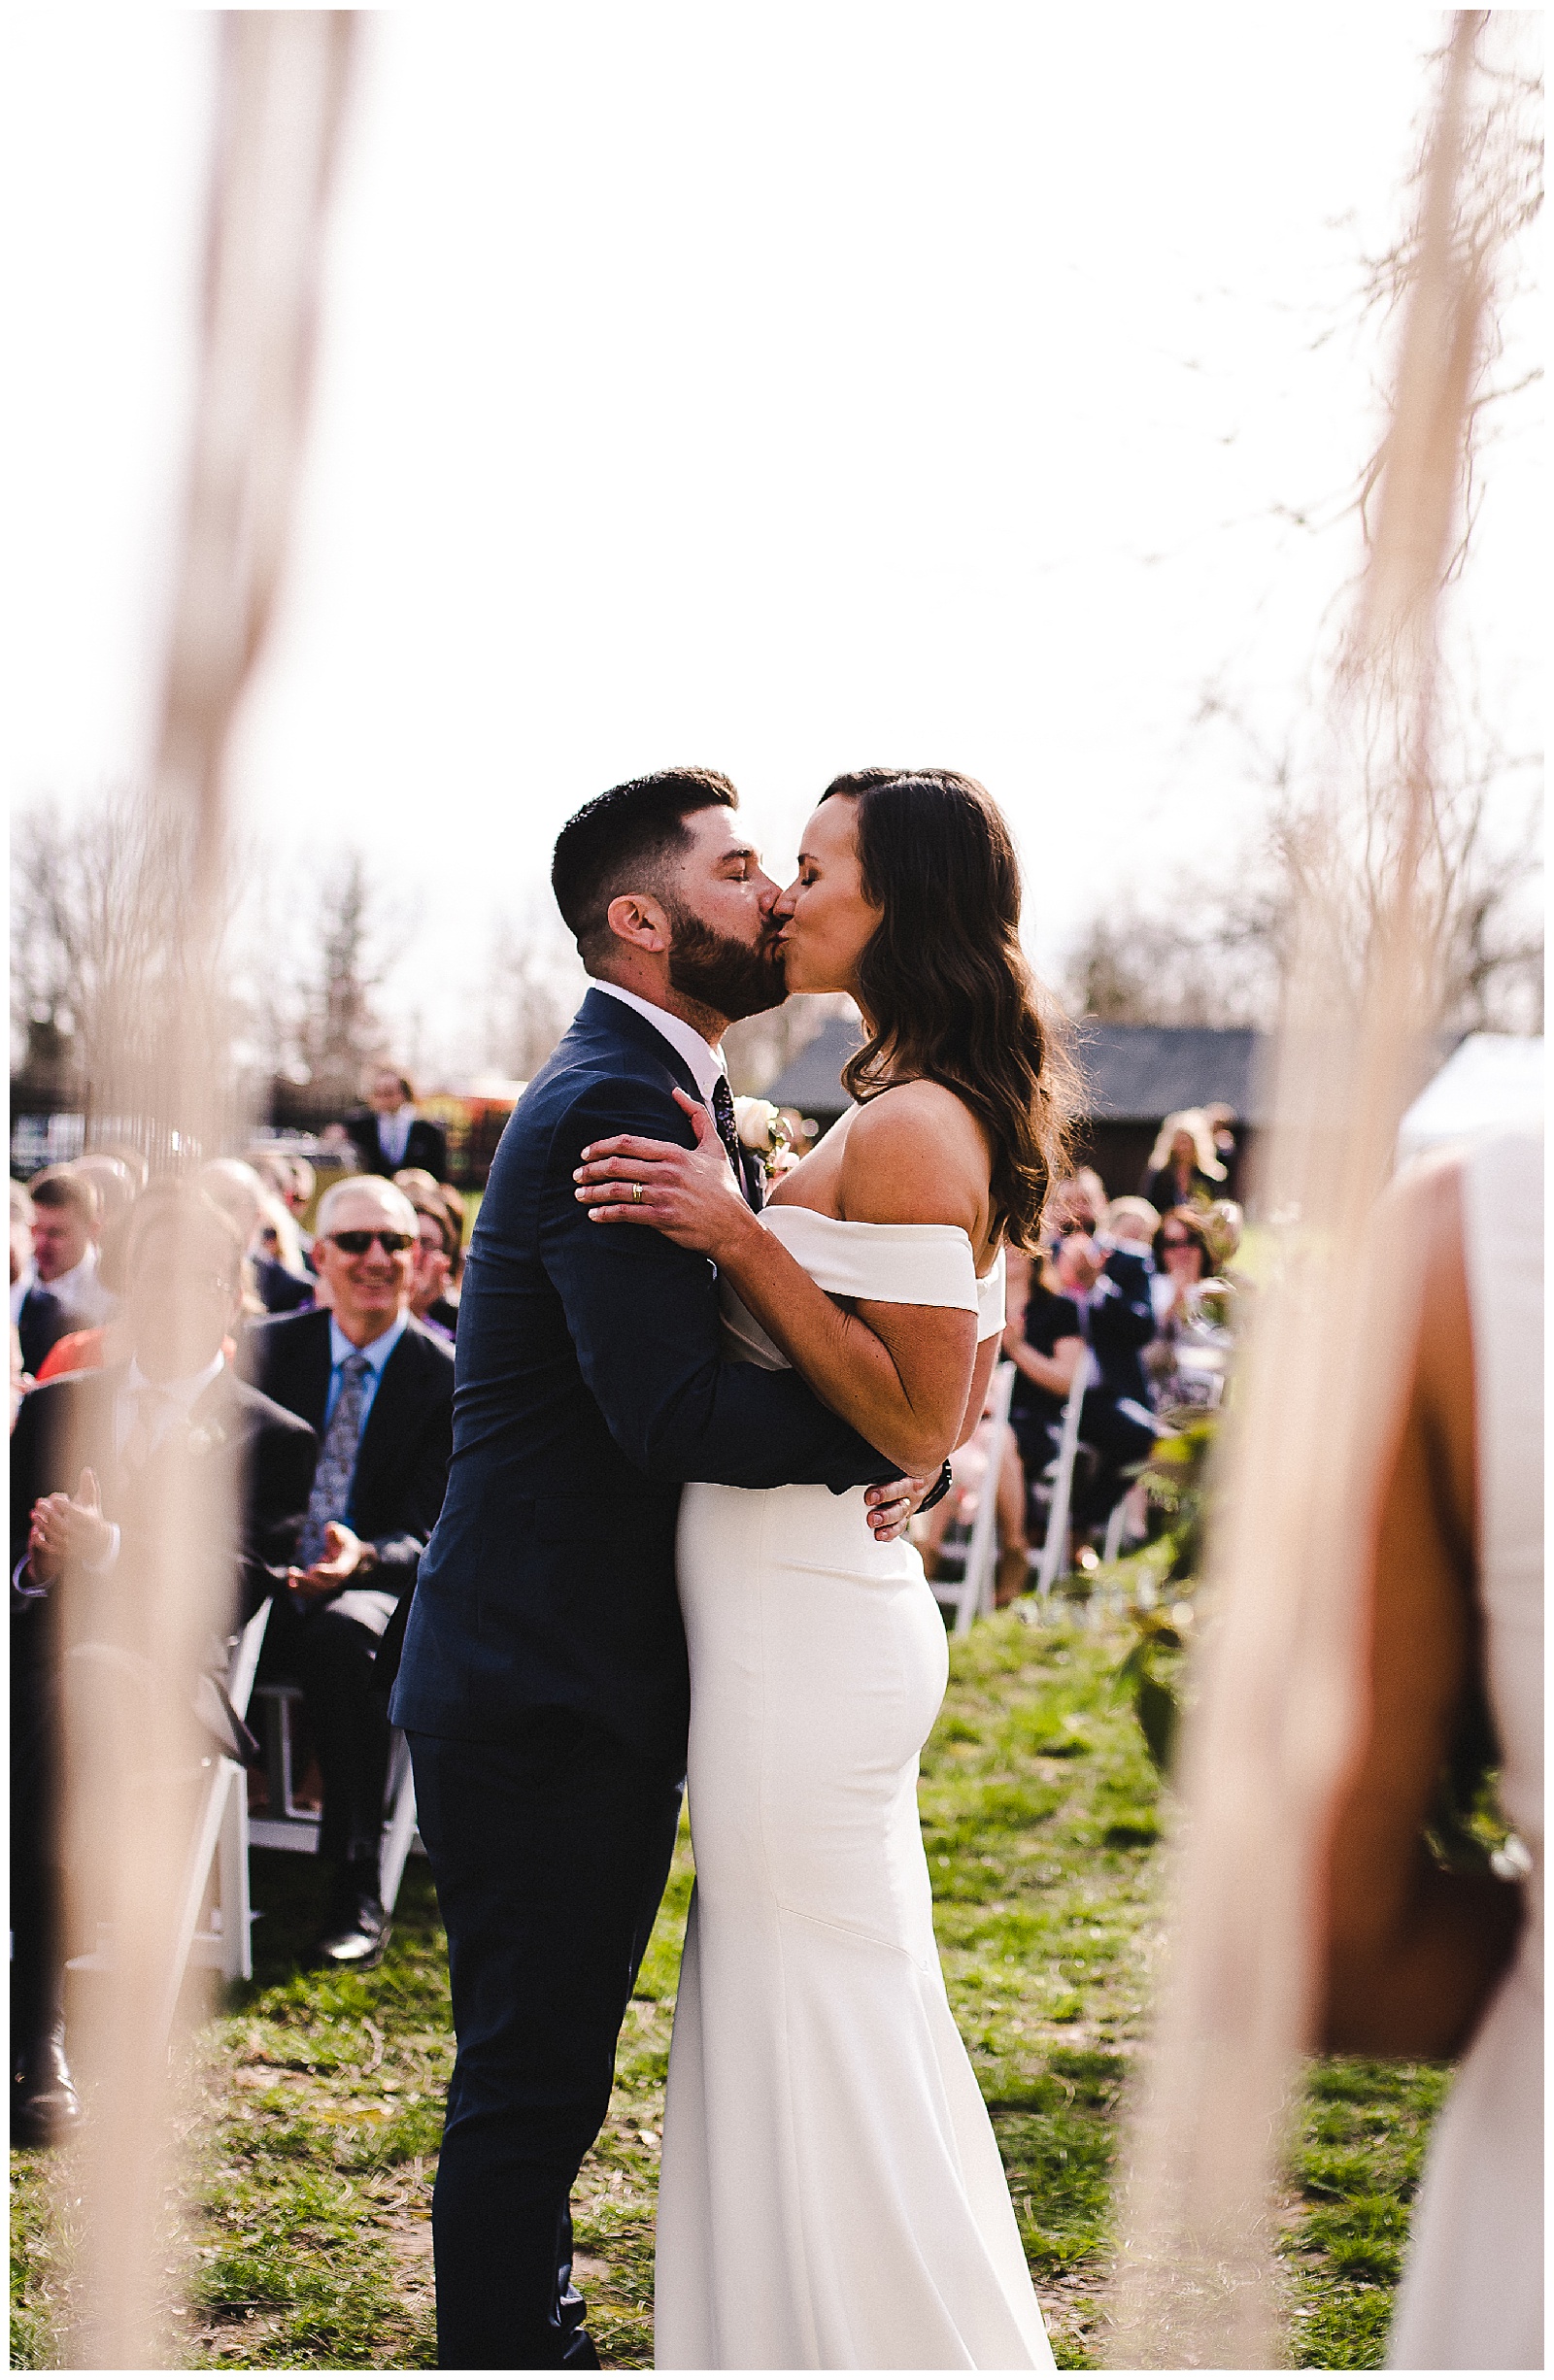 Bride and groom's first kiss as an officially married couple. 